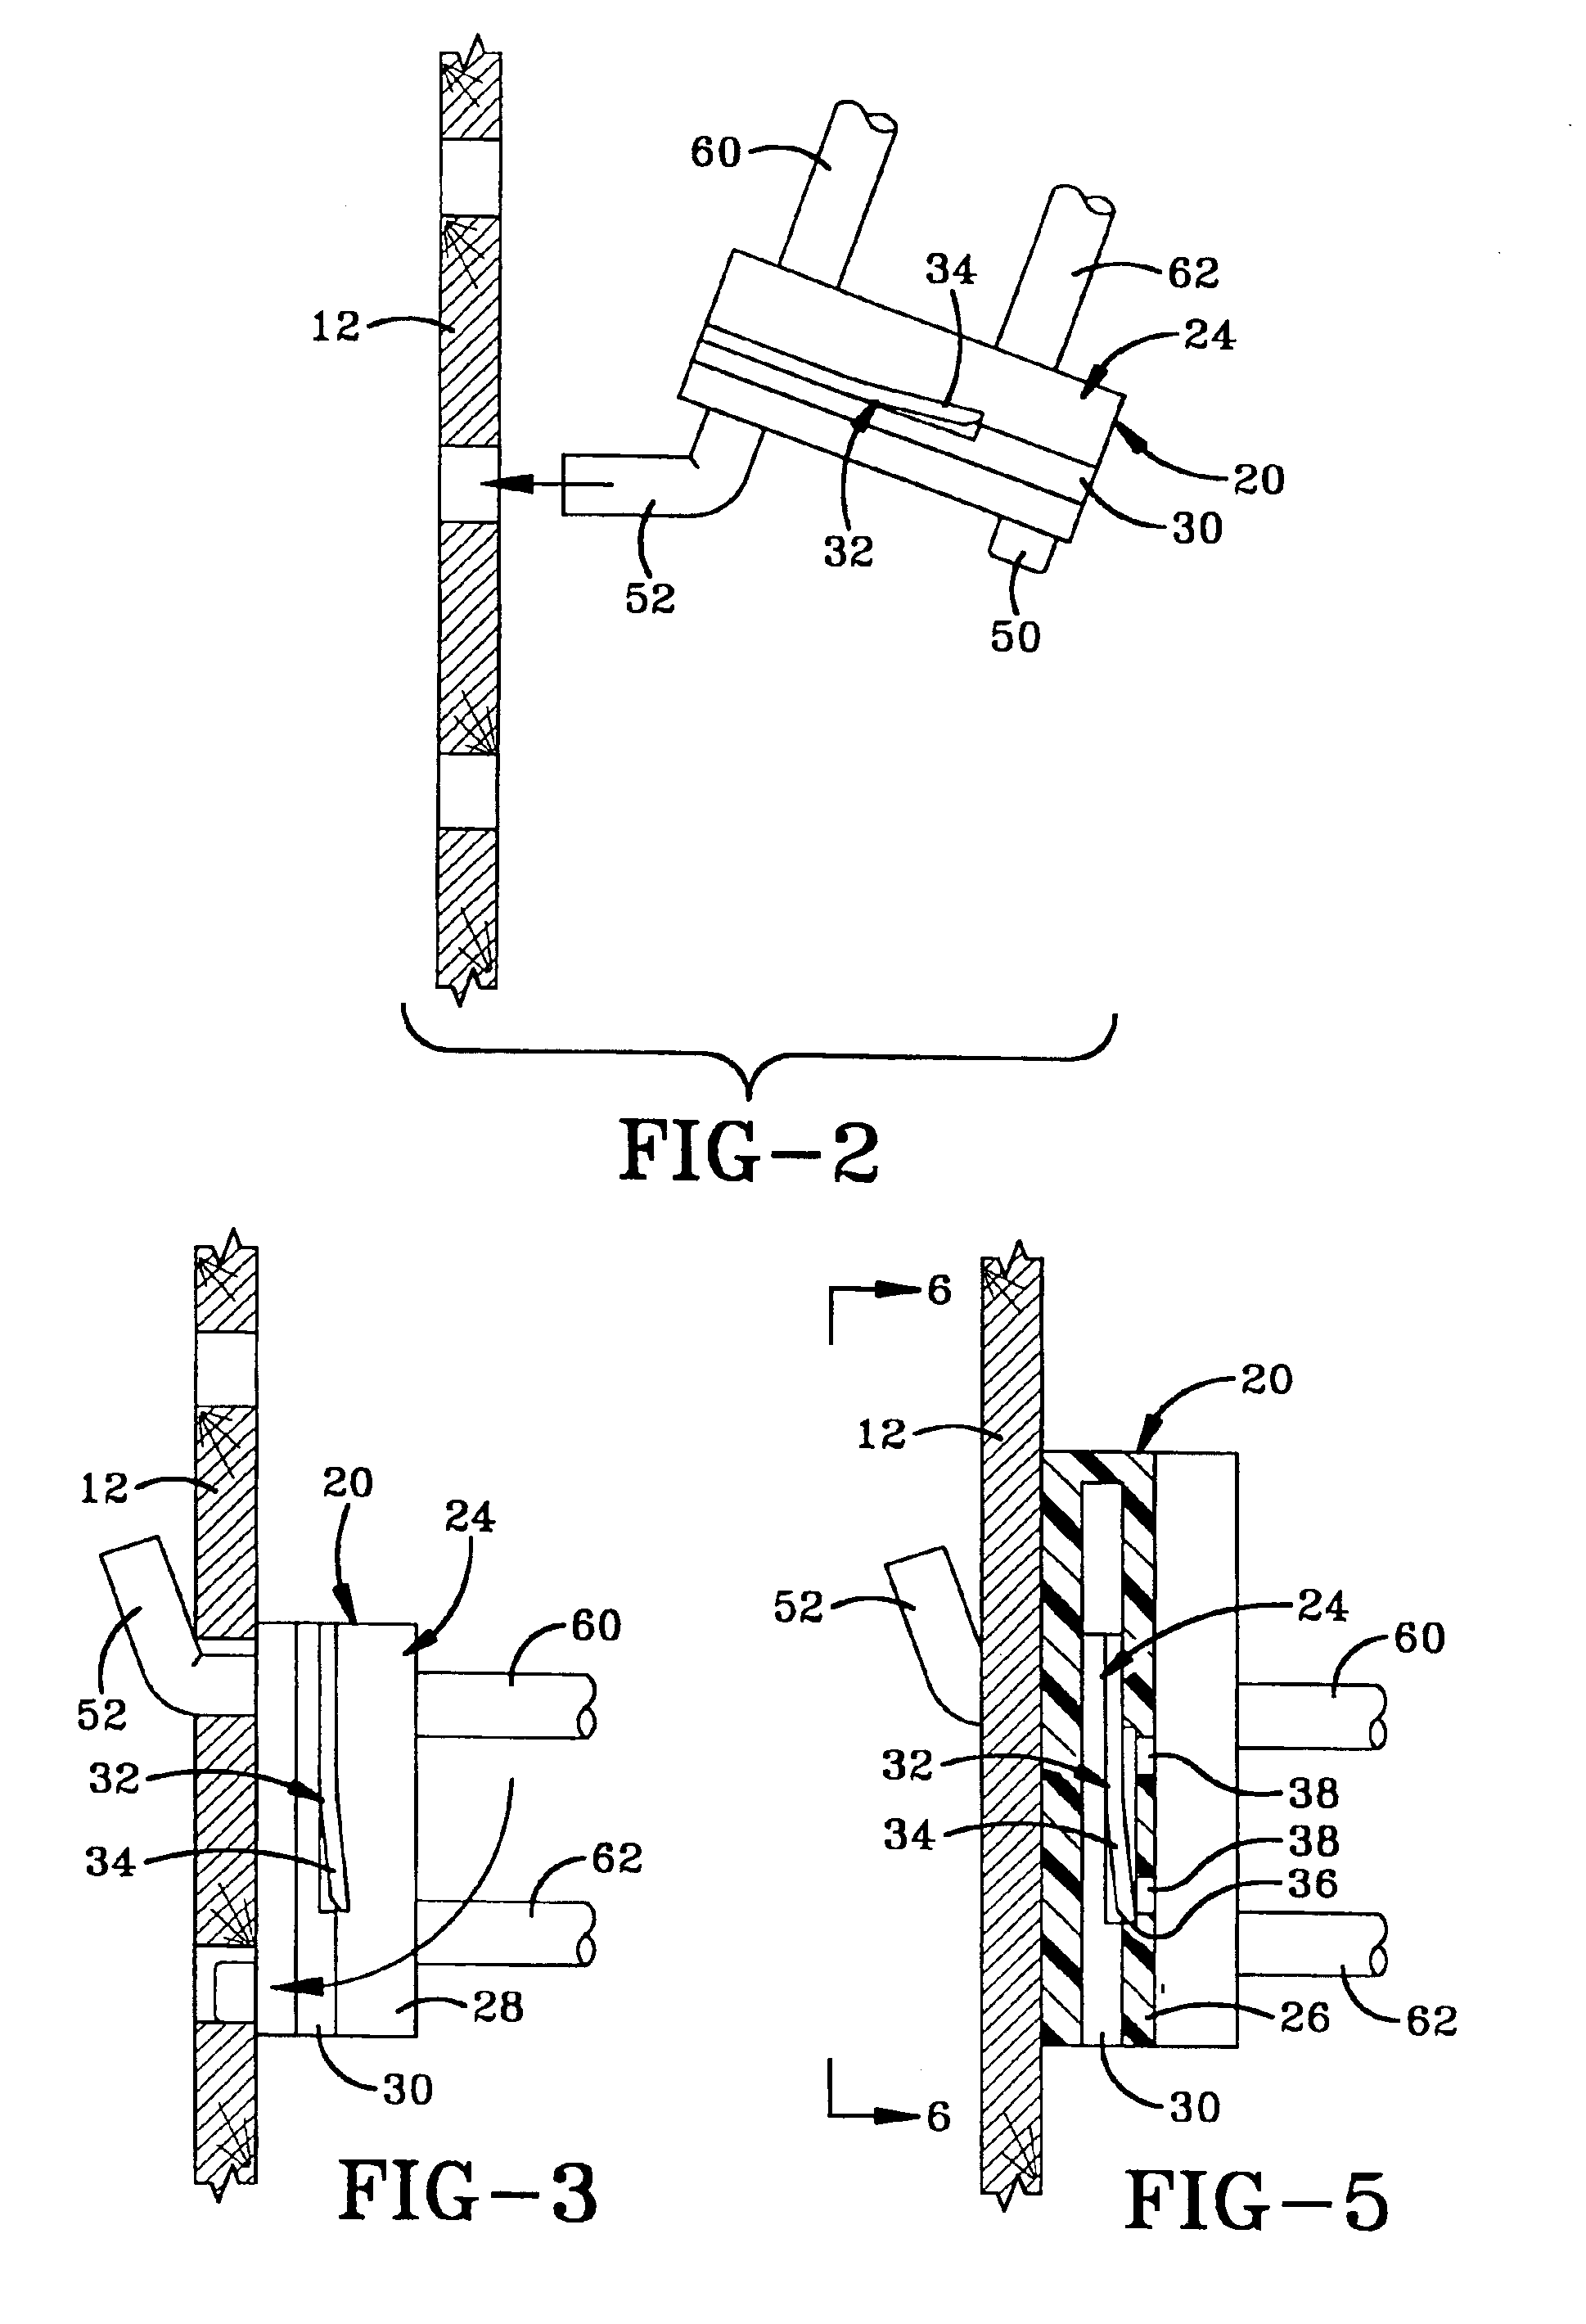 Security device for preventing rapid removal of merchandise